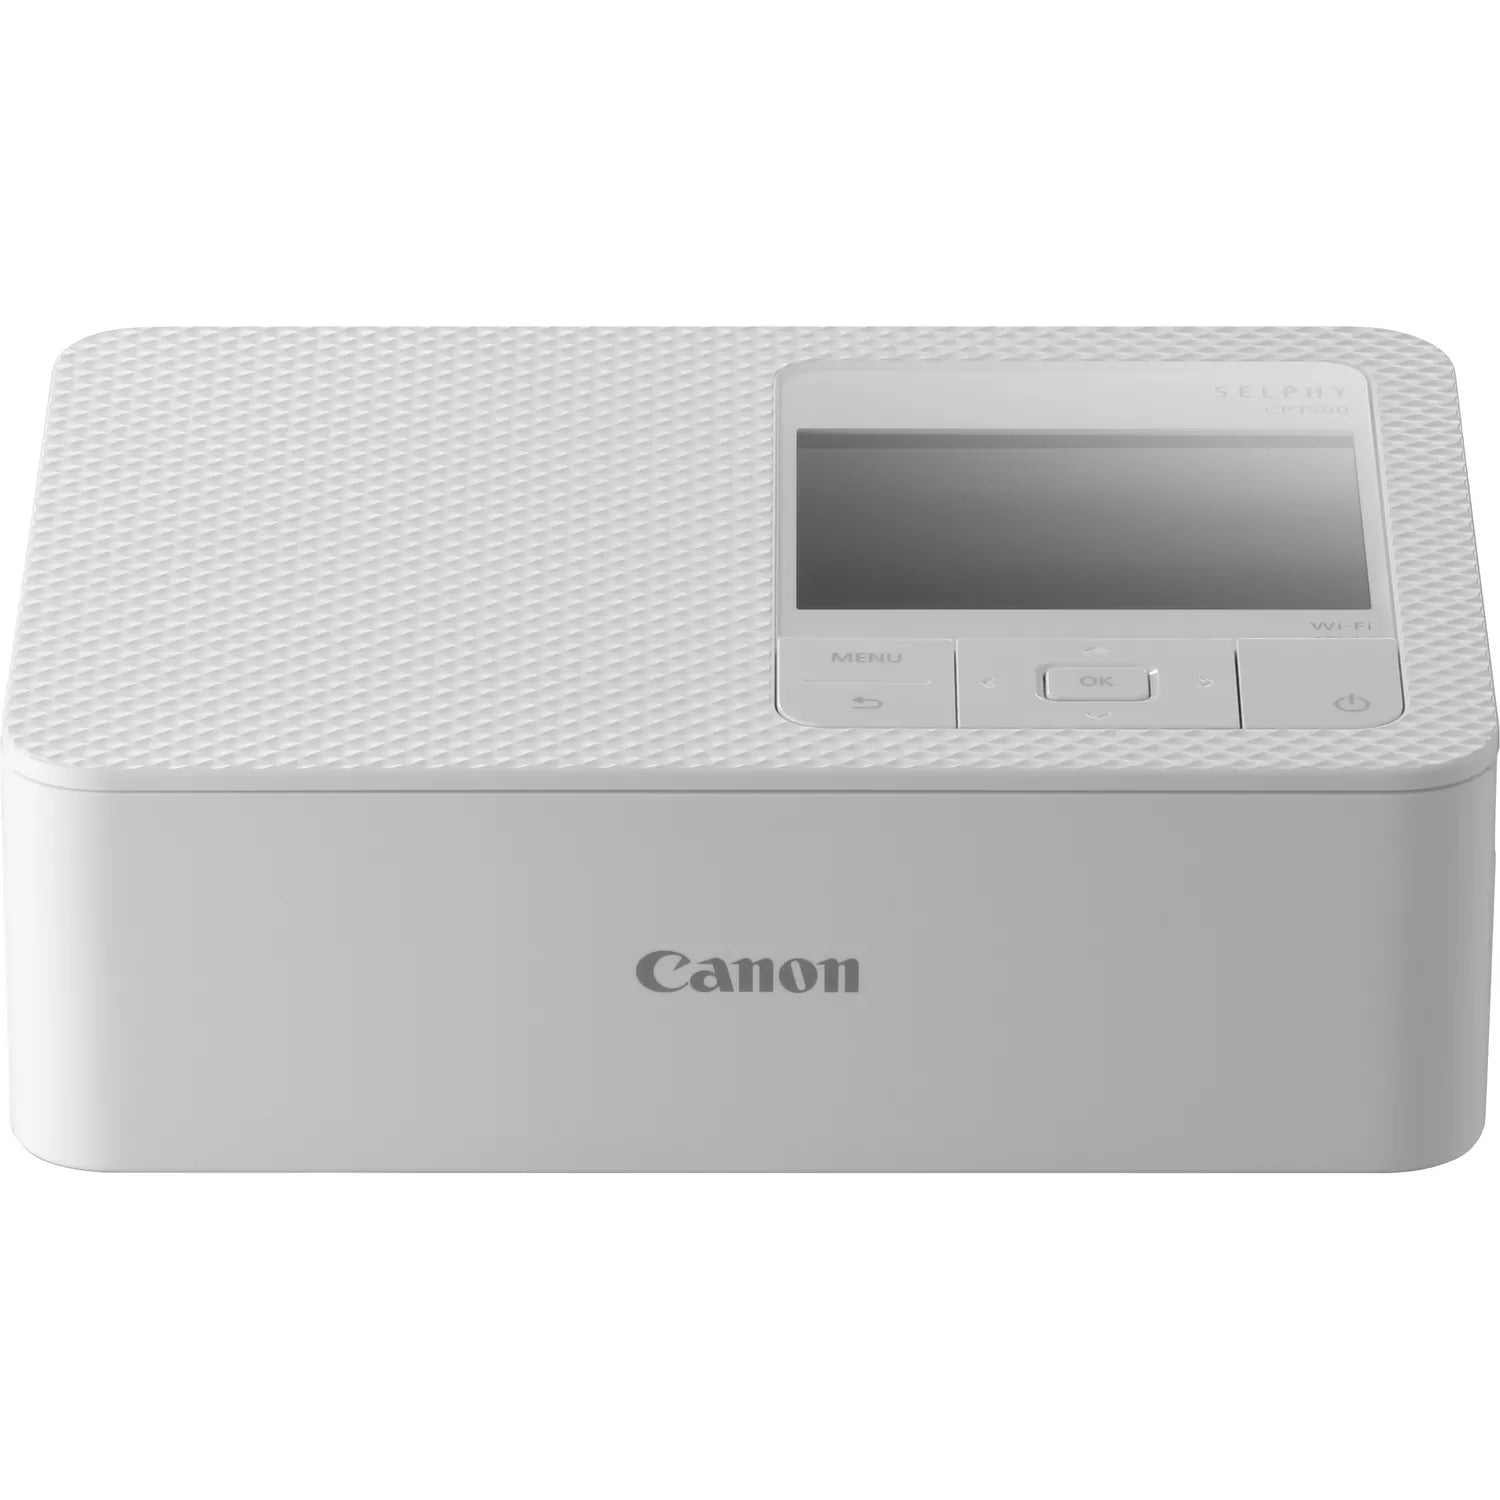 Product Image of Canon SELPHY CP1500 Printer - White